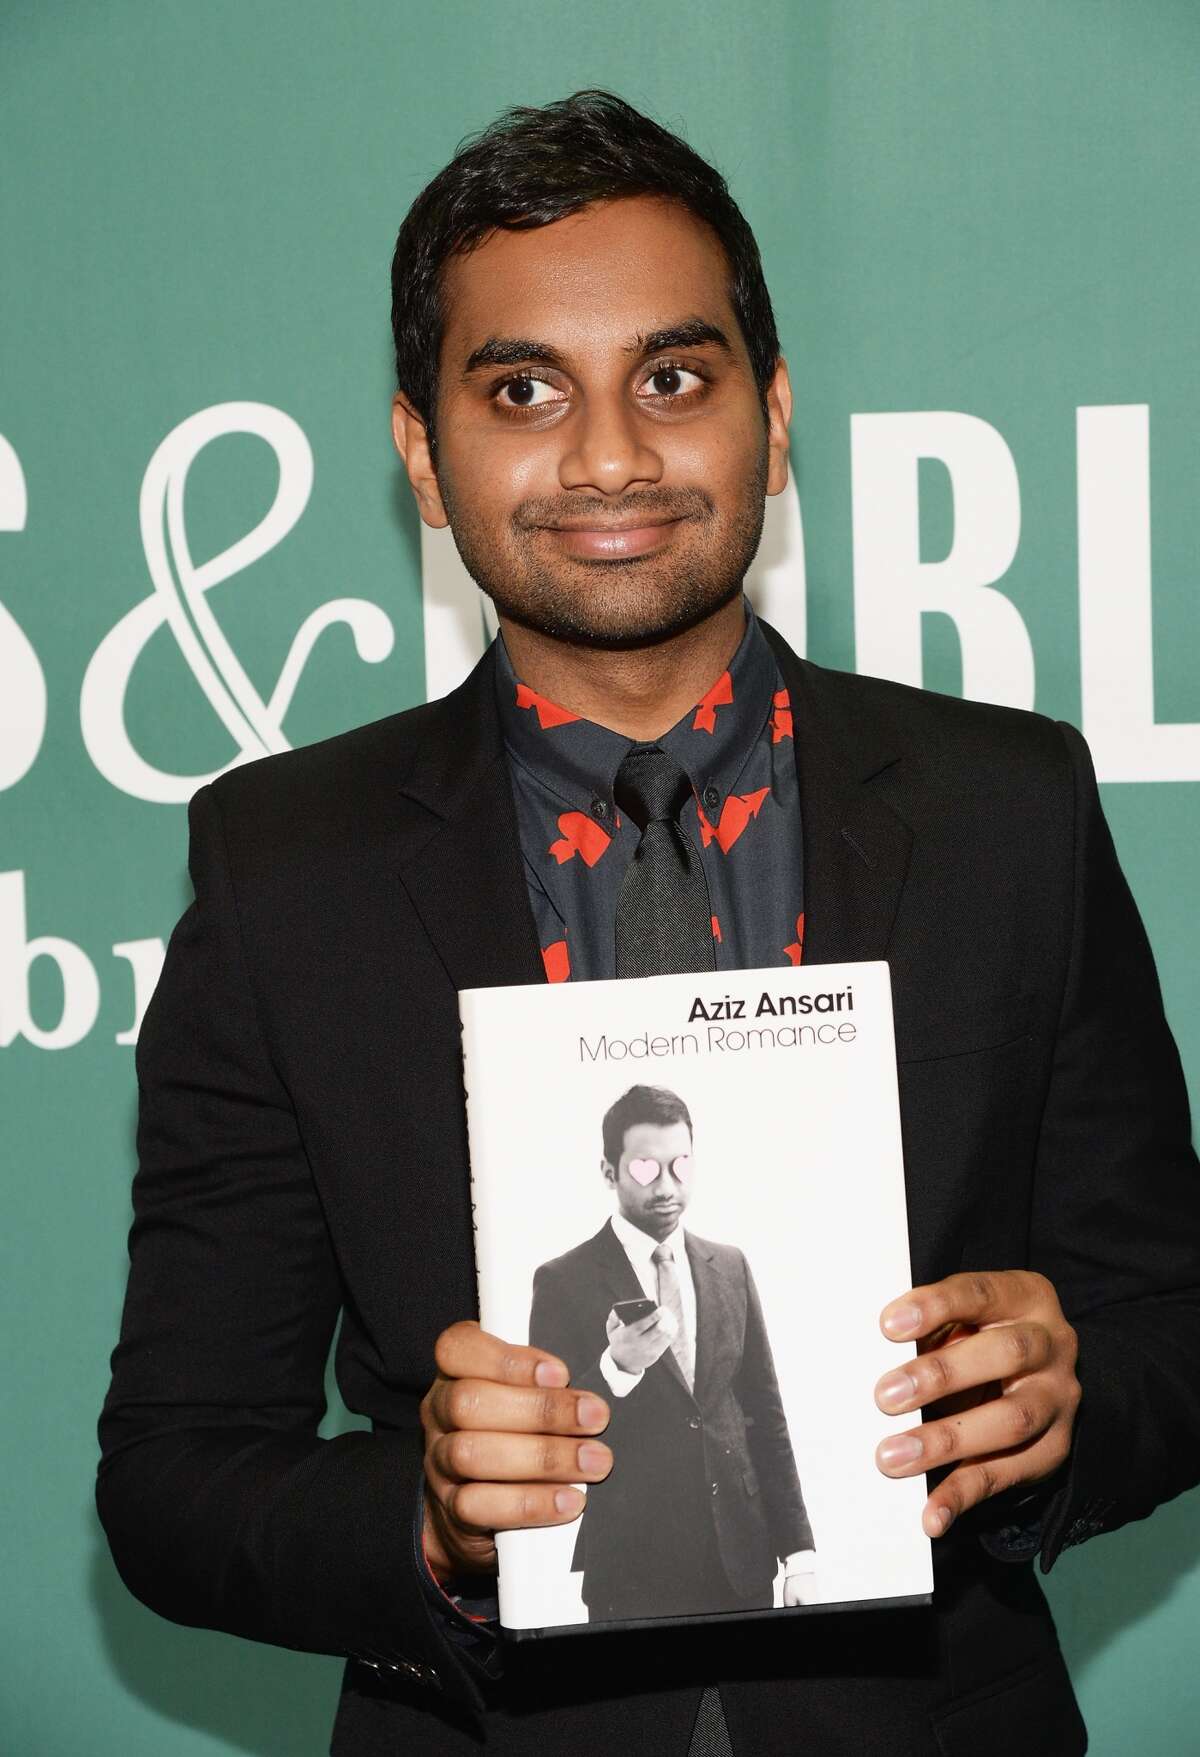 Aziz Ansari, "Modern Romance"Release date: June 16, 2015Dating isn't what it used to be -- at least that's the premise this comedian explores in his new book. Thanks to texting and other modern "conveniences," Ansari surmises that these actually cause hiccups in the quest to find true love.